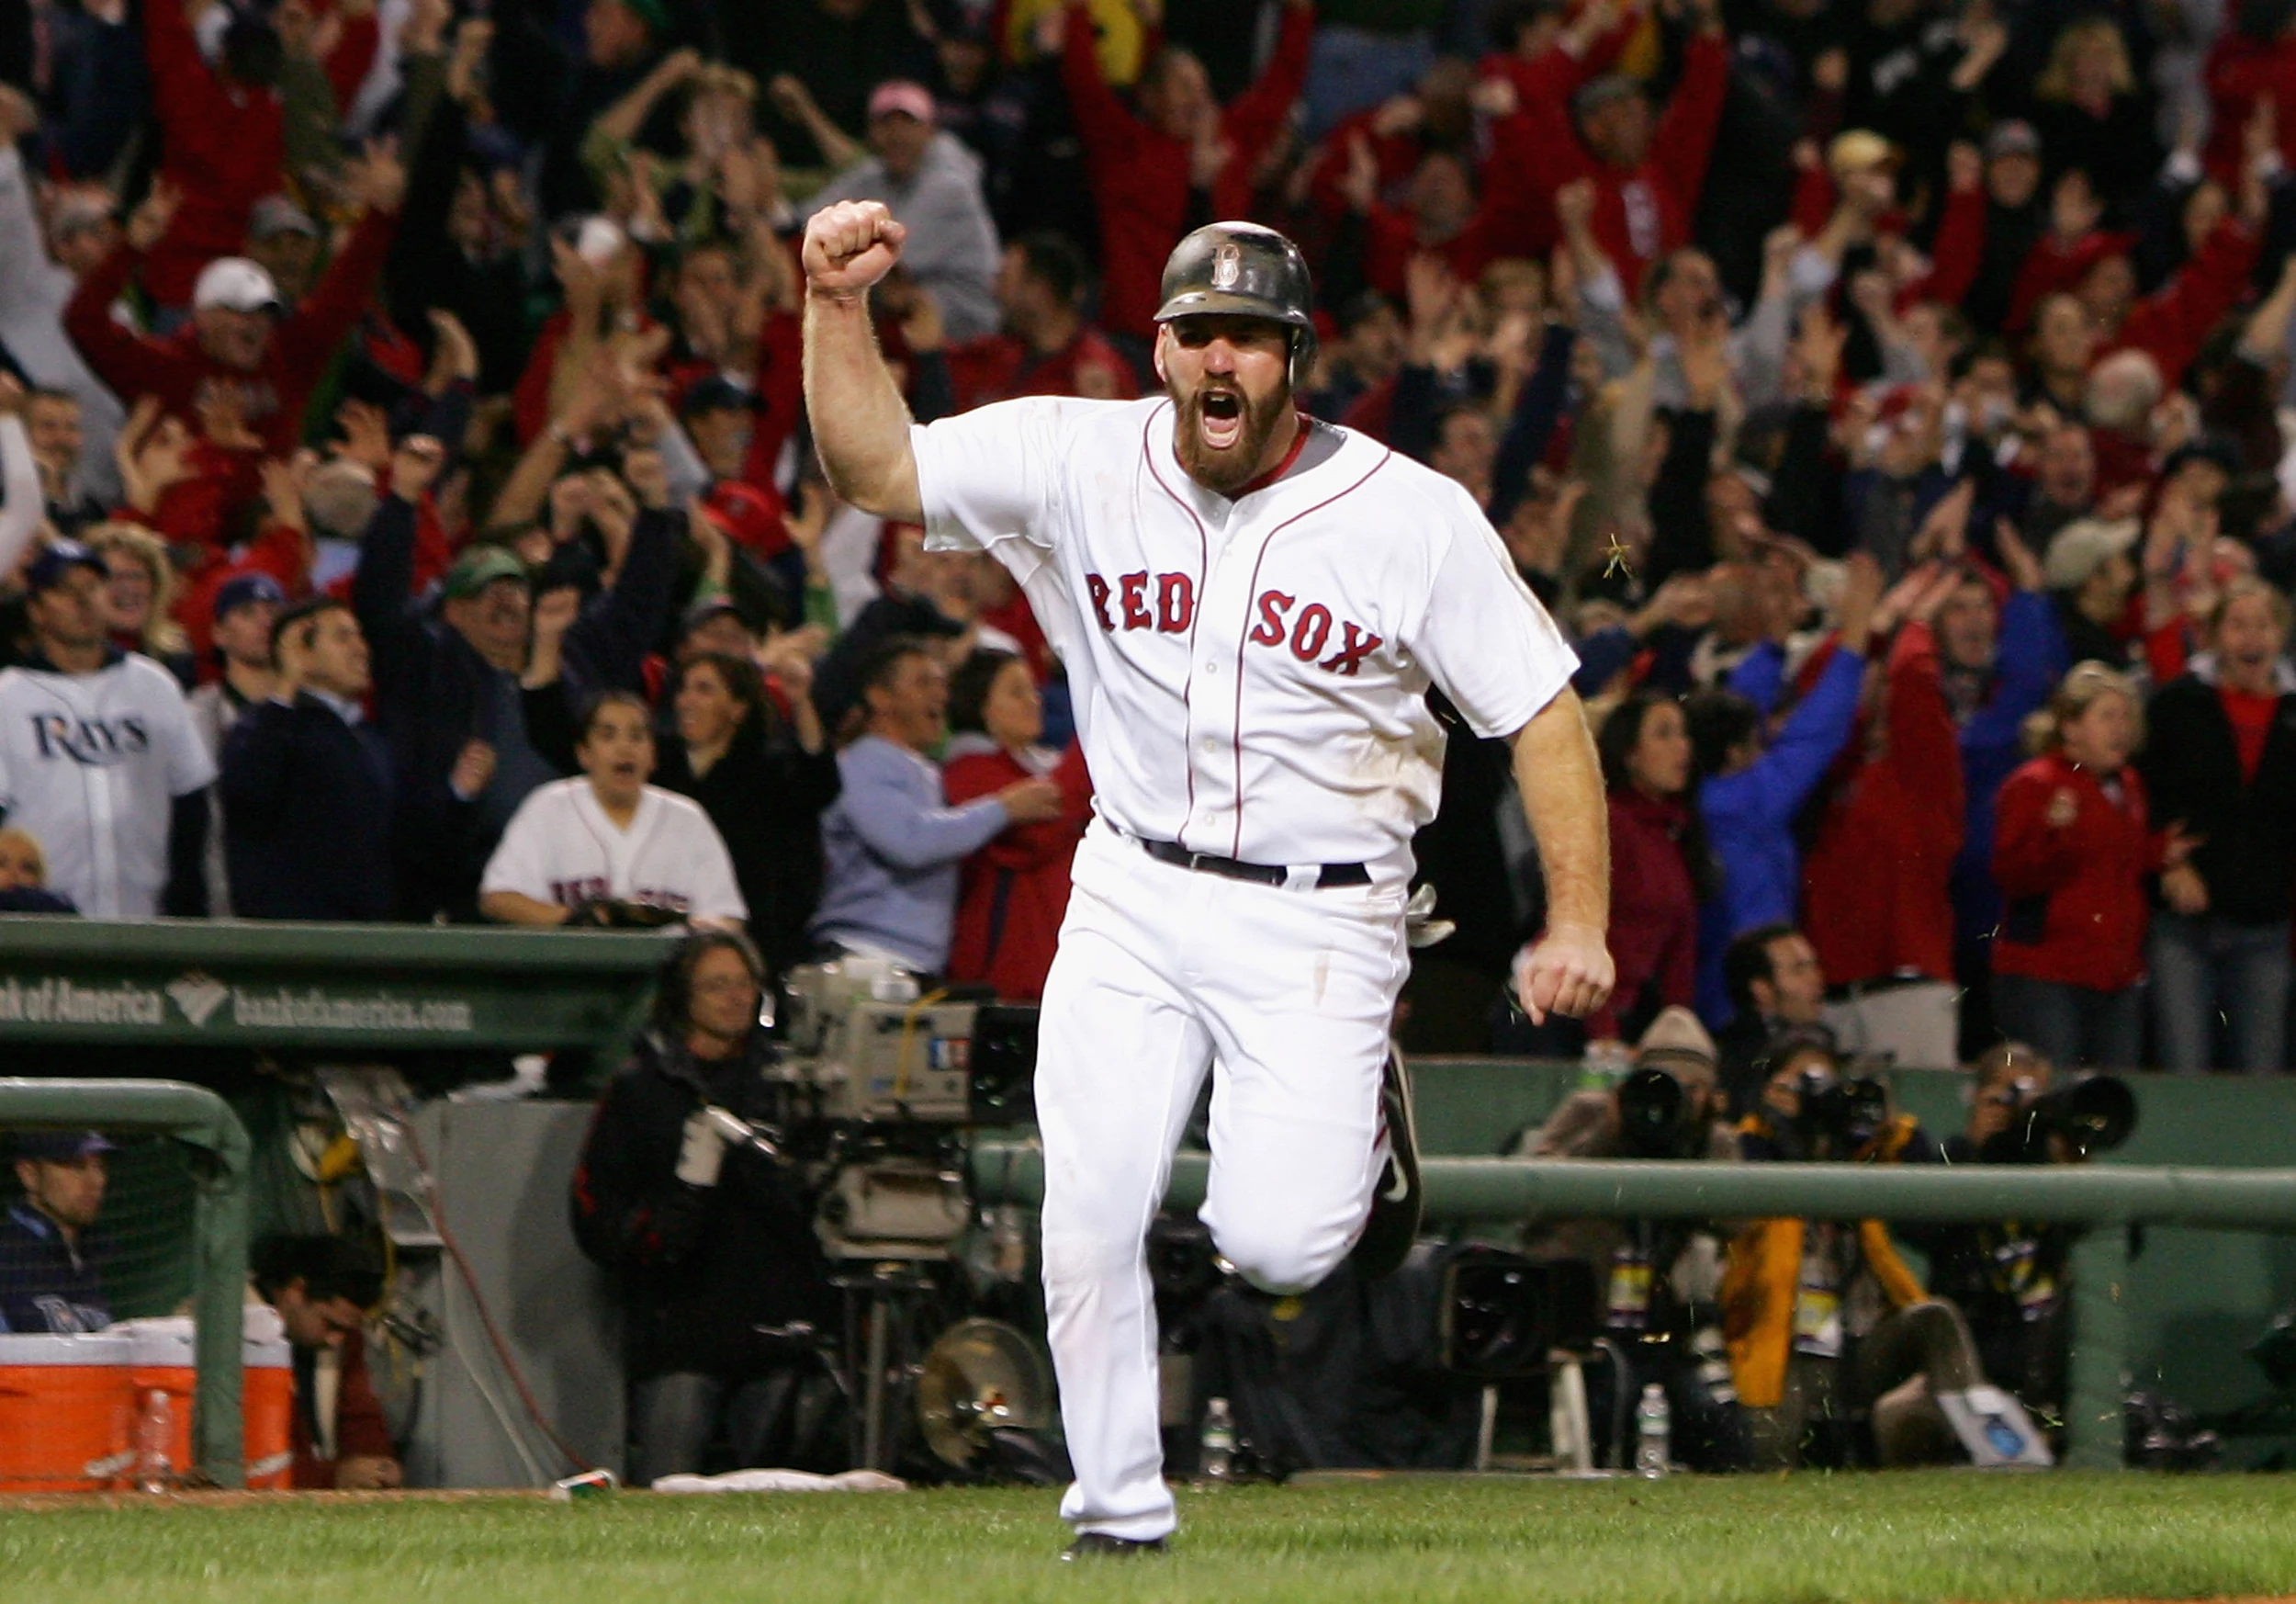 Kevin Youkilis Replacing Dennis Eckersley in Red Sox TV Booth